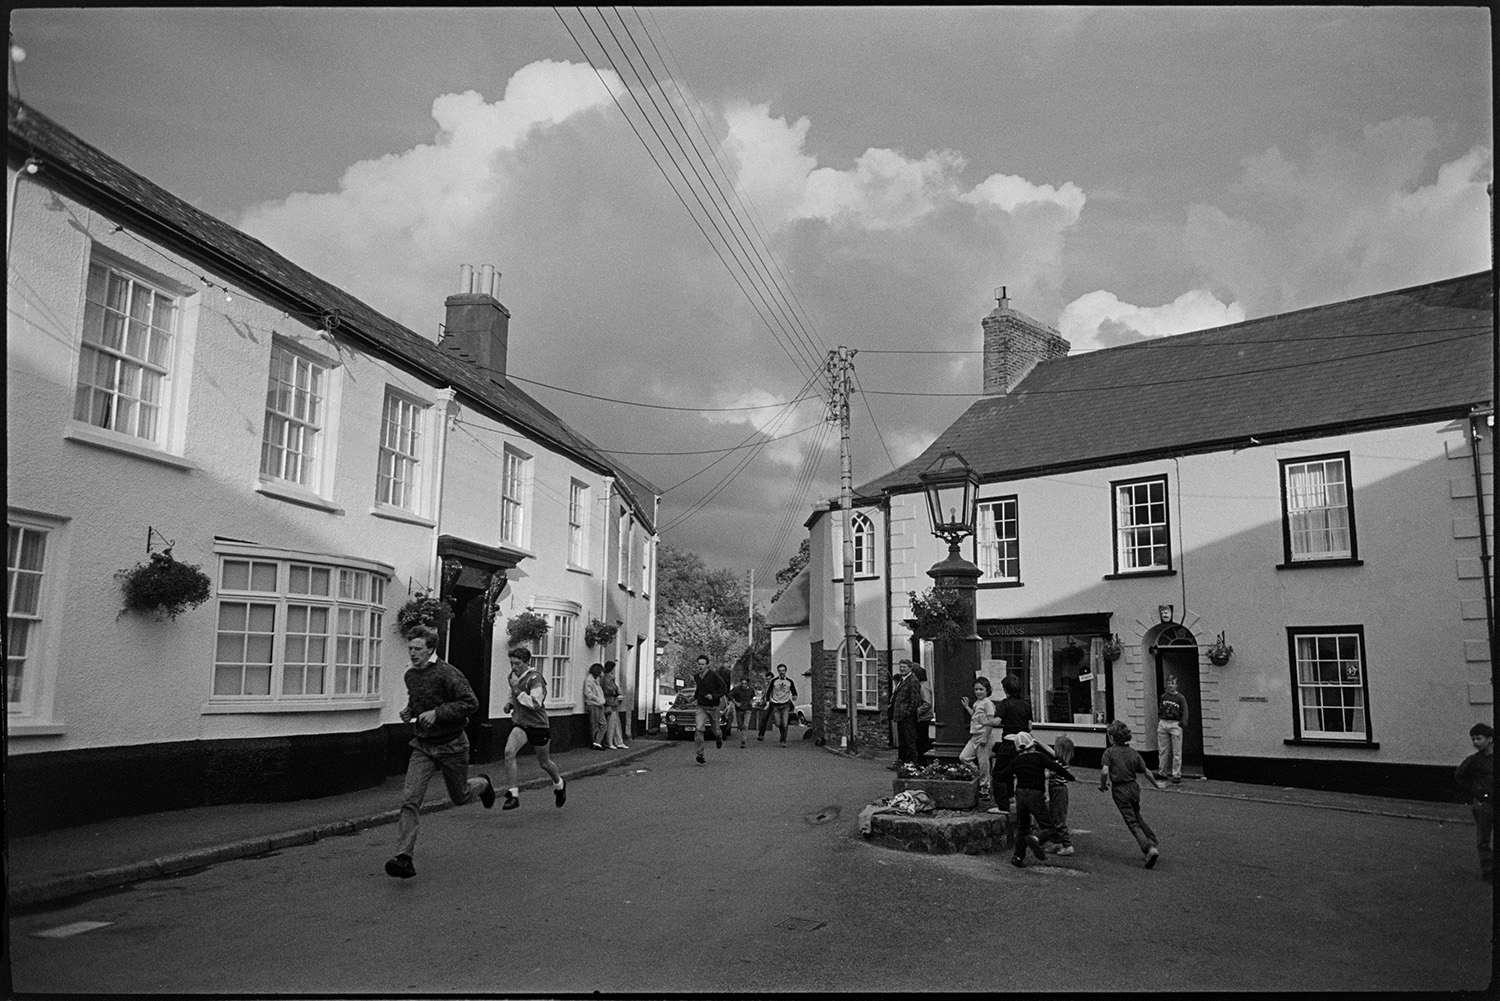 People running through a street in Chulmleigh in a race at Chulmleigh Fair. Children are watching the competitors by a lampost.